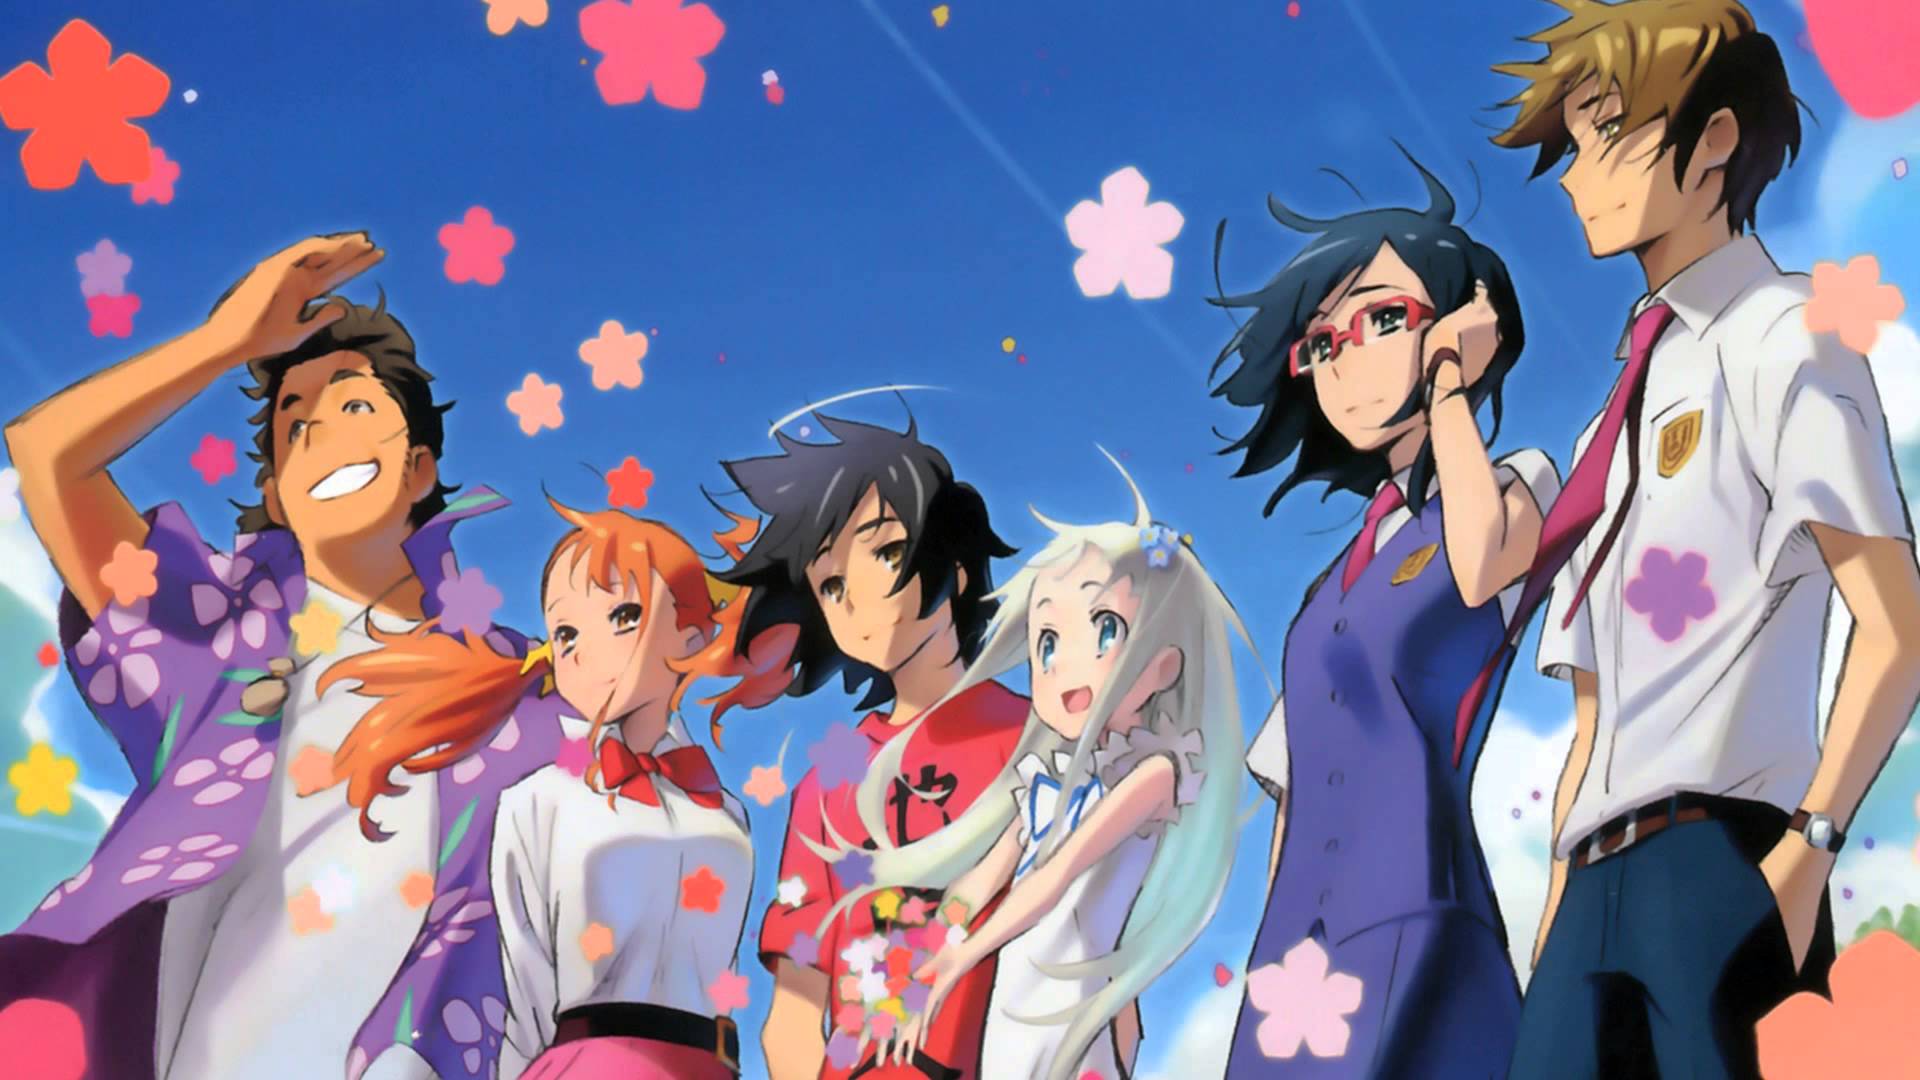 Anohana The Flower We Saw That Day HD Wallpaper and Background